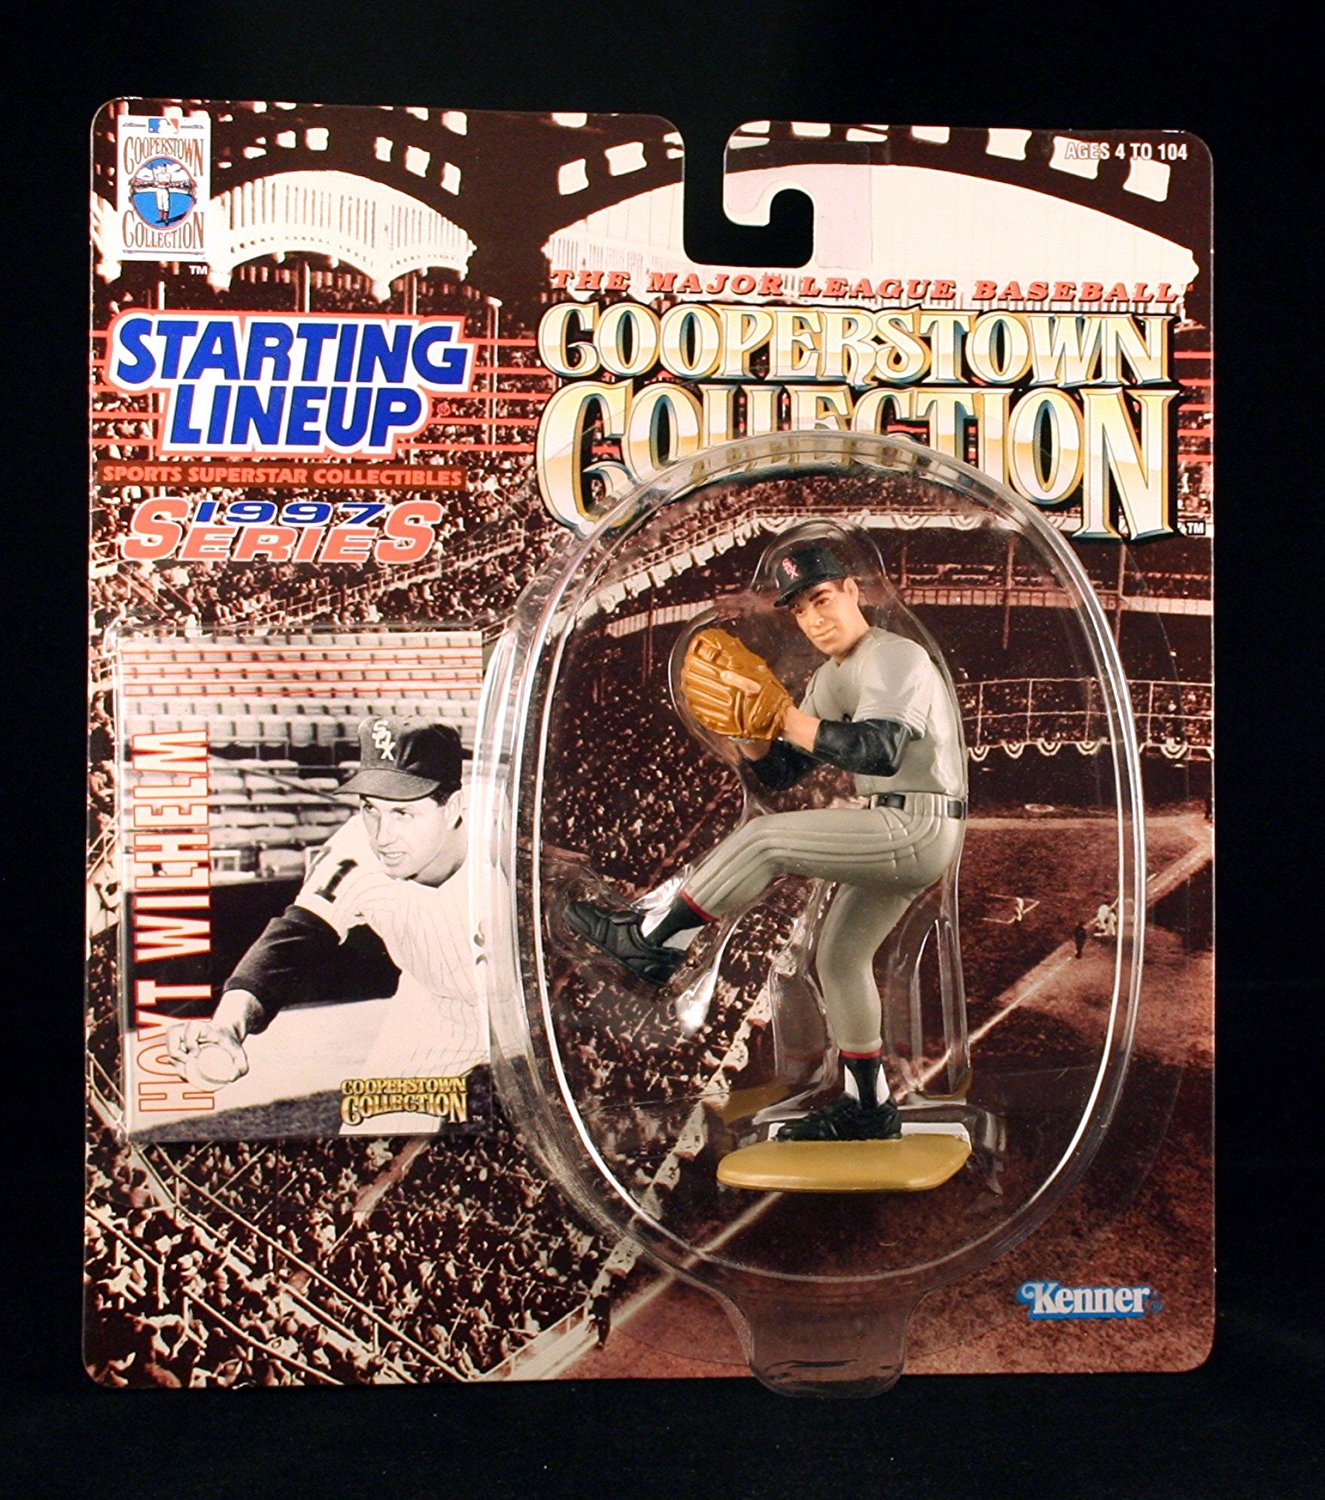 HOYT WILHELM / CHICAGO WHITE SOX 1997 MLB Cooperstown Collection Starting Lineup Action Figure & Exclusive Trading Card